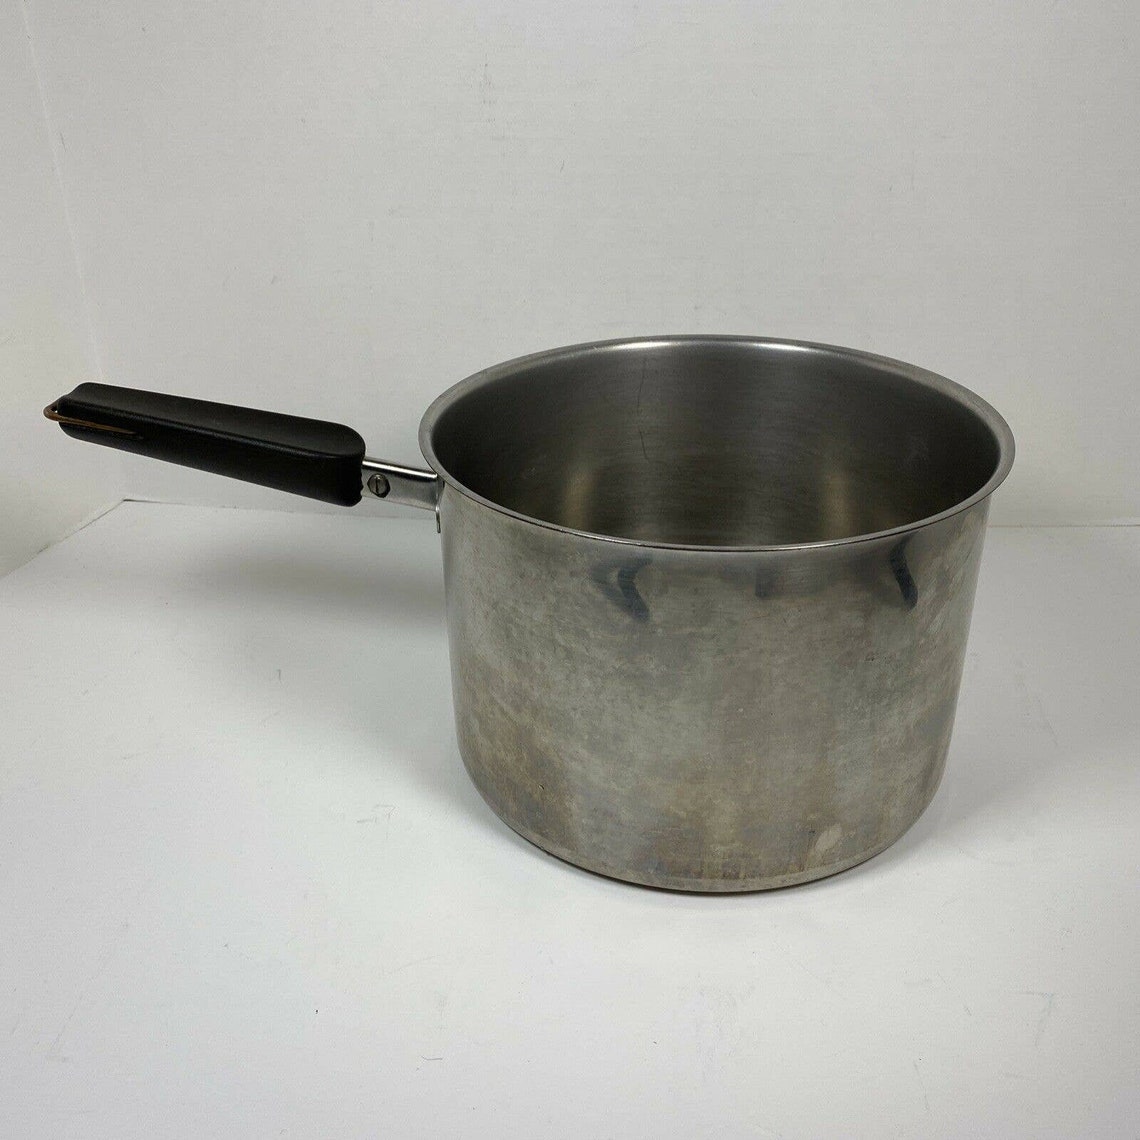 Revere Ware 4 Qt. Sauce Pan Pot Stainless Steel Clinton IL USA | Etsy